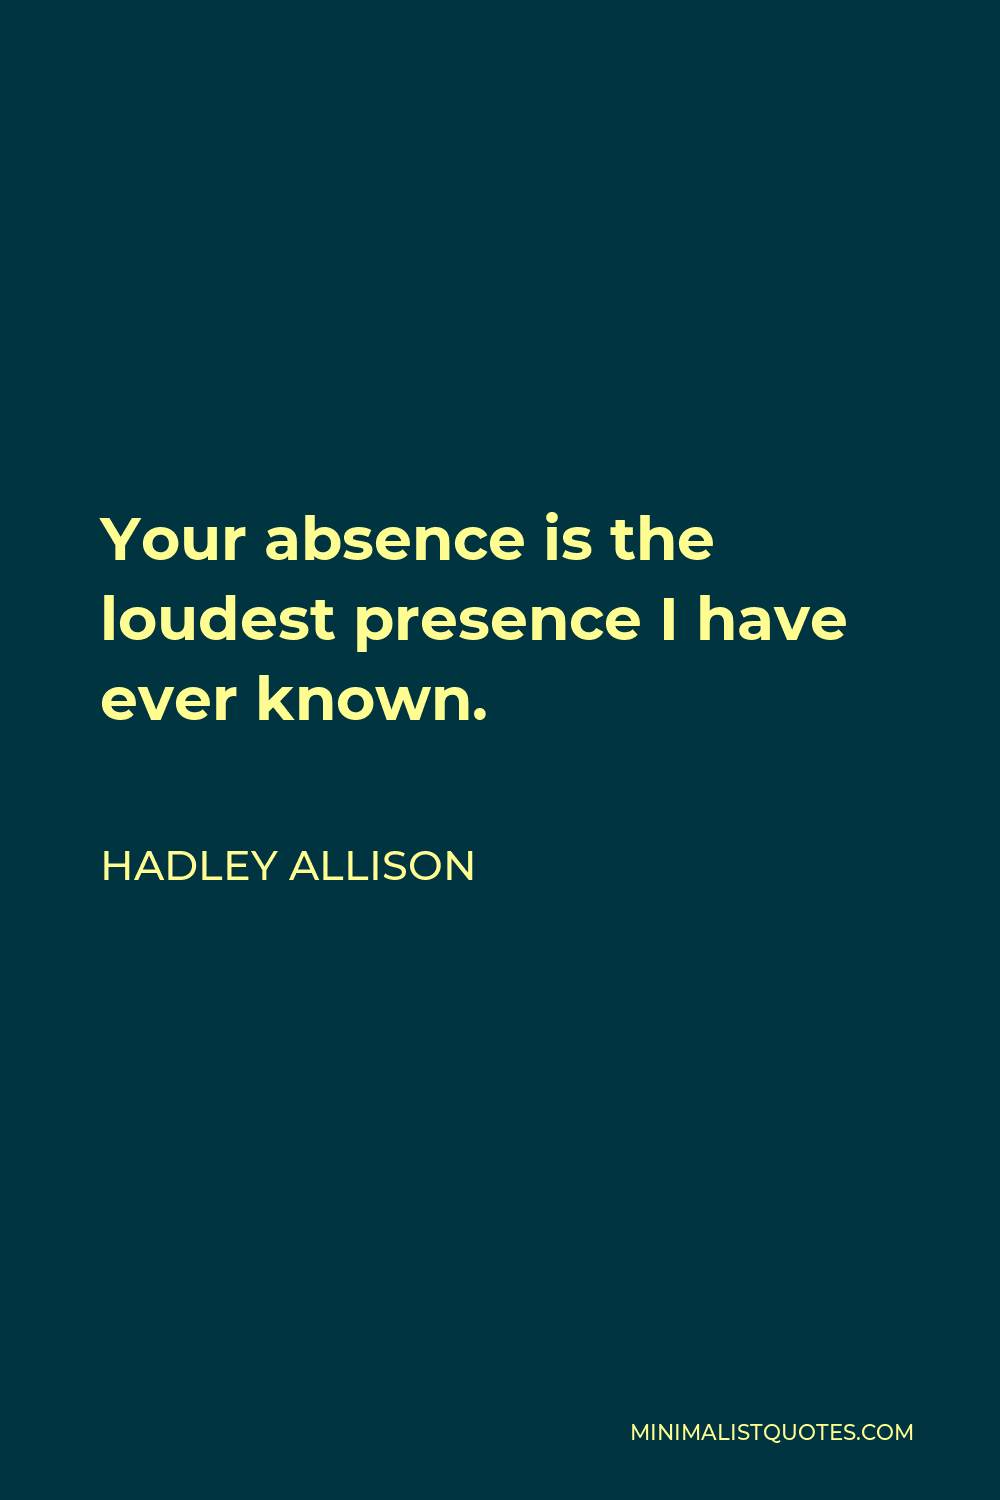 Hadley Allison Quote - Your absence is the loudest presence I have ever known.